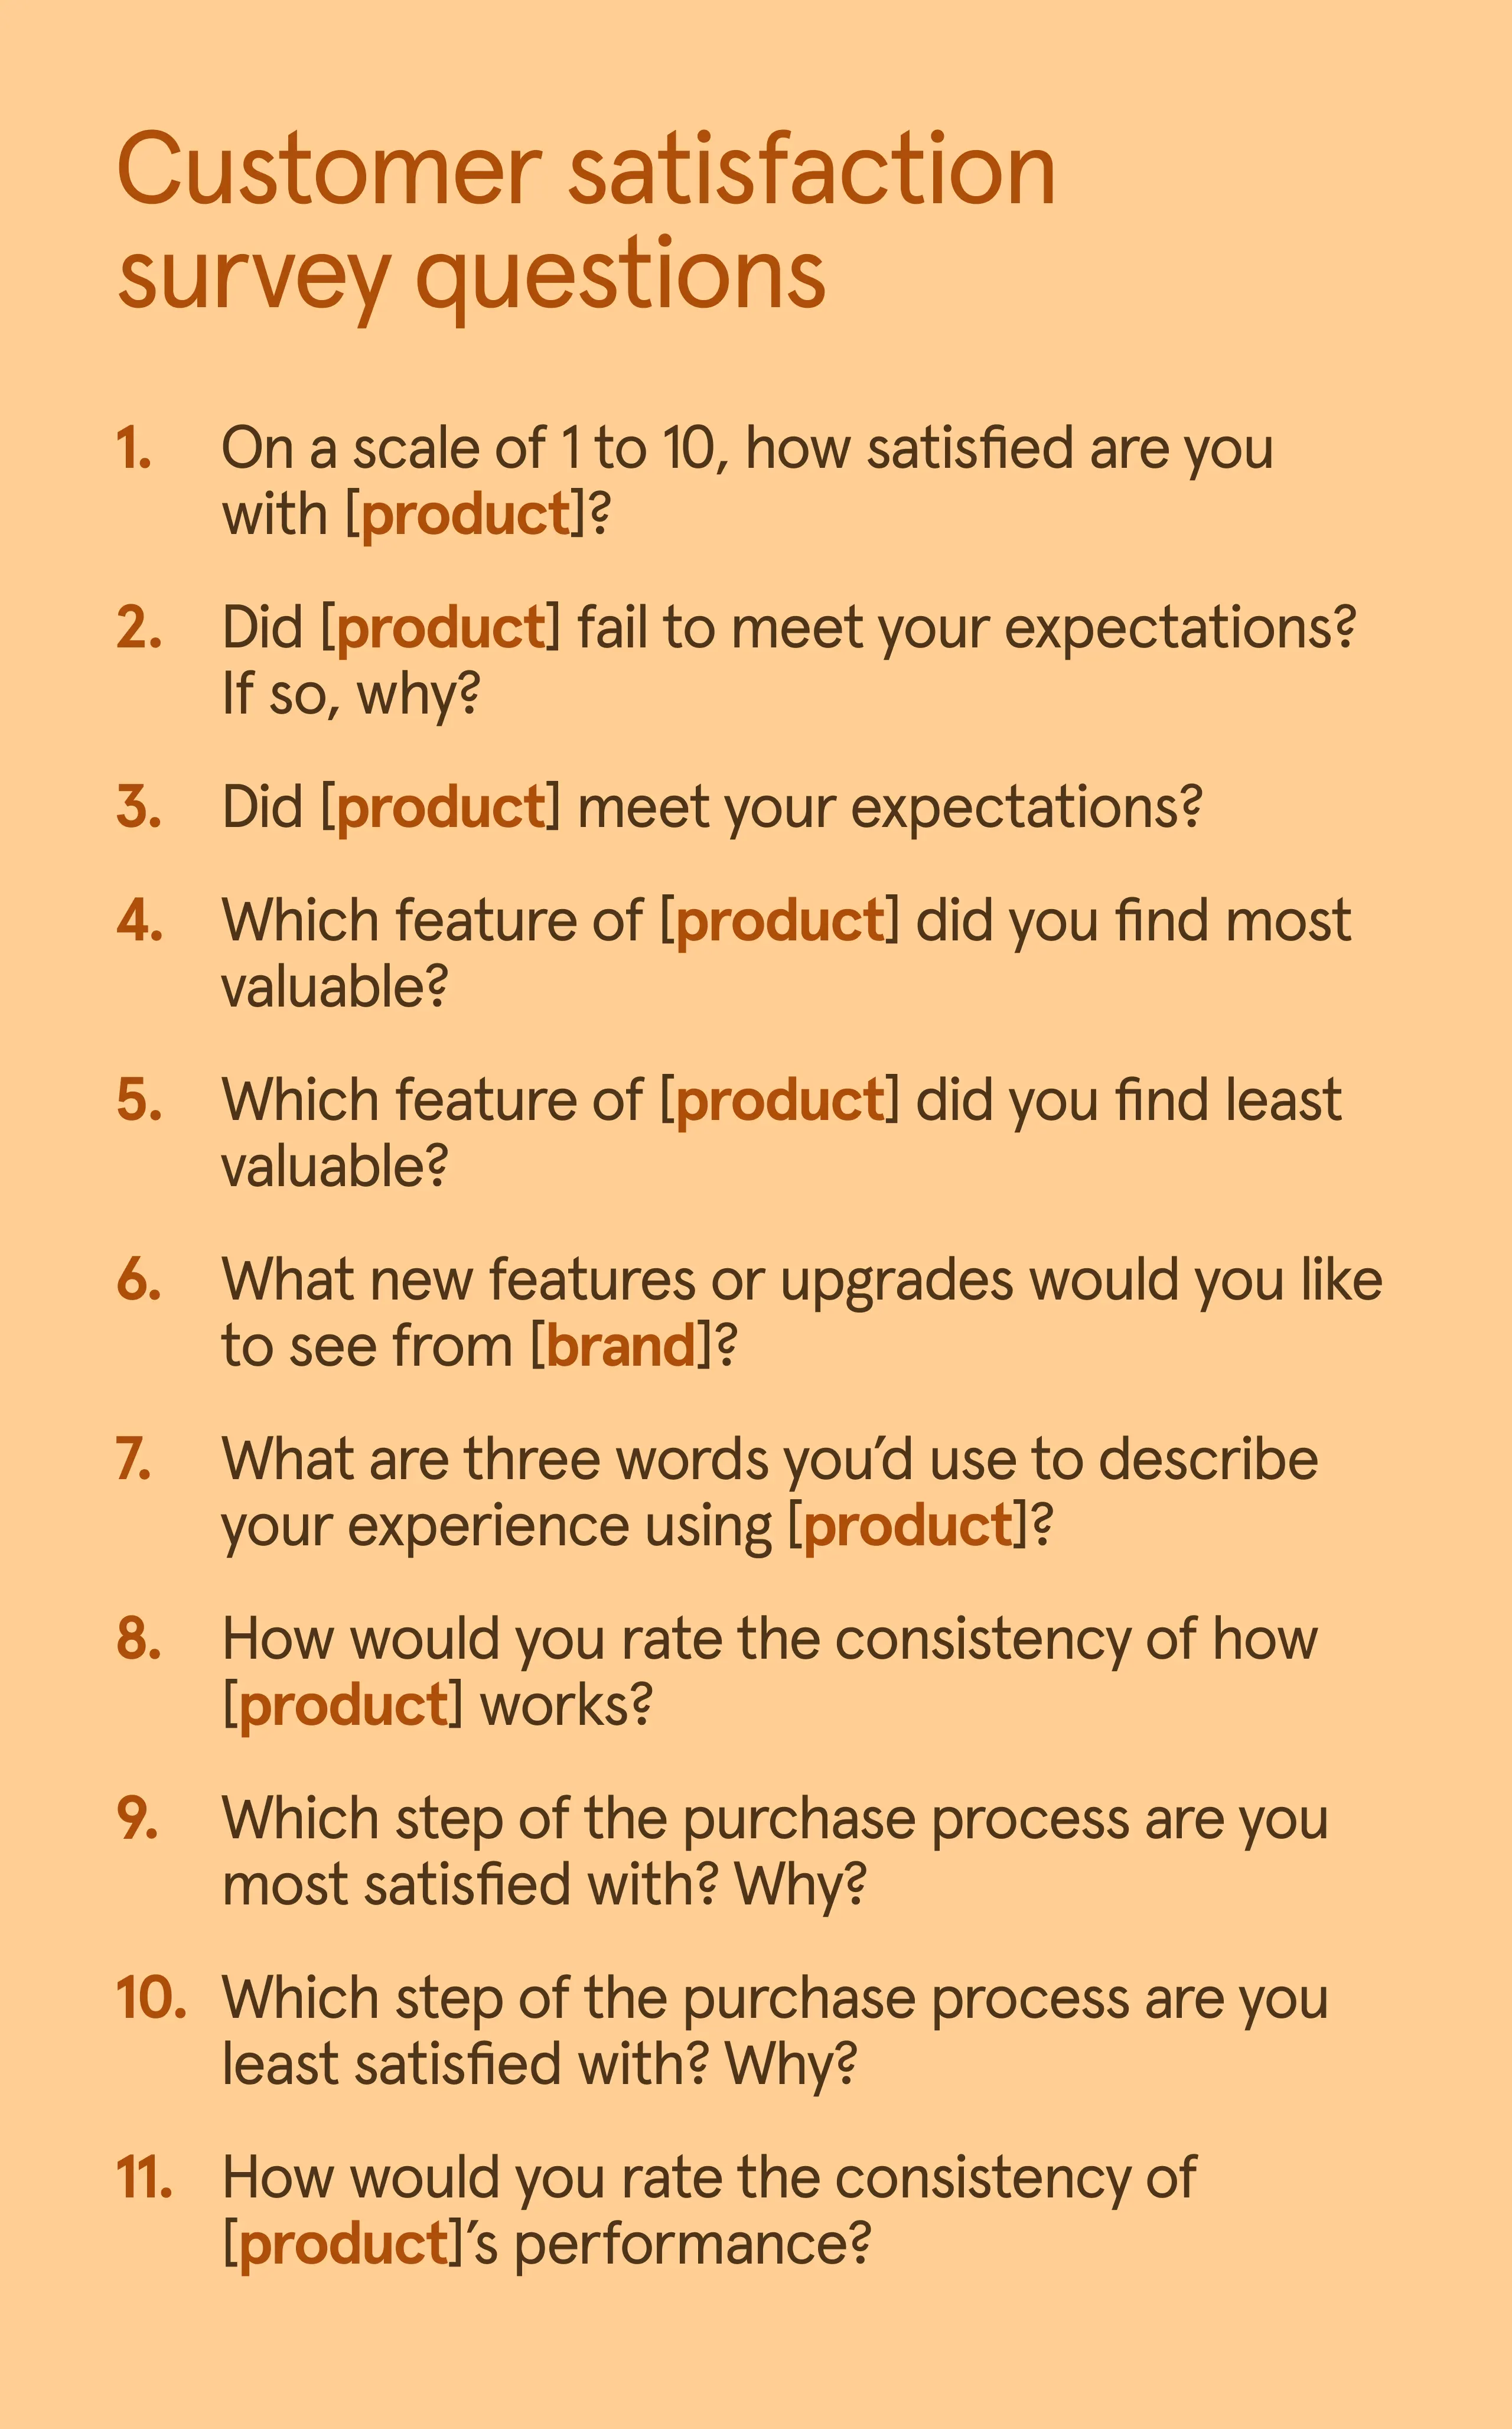 List of 11 customer satisfaction survey question examples.